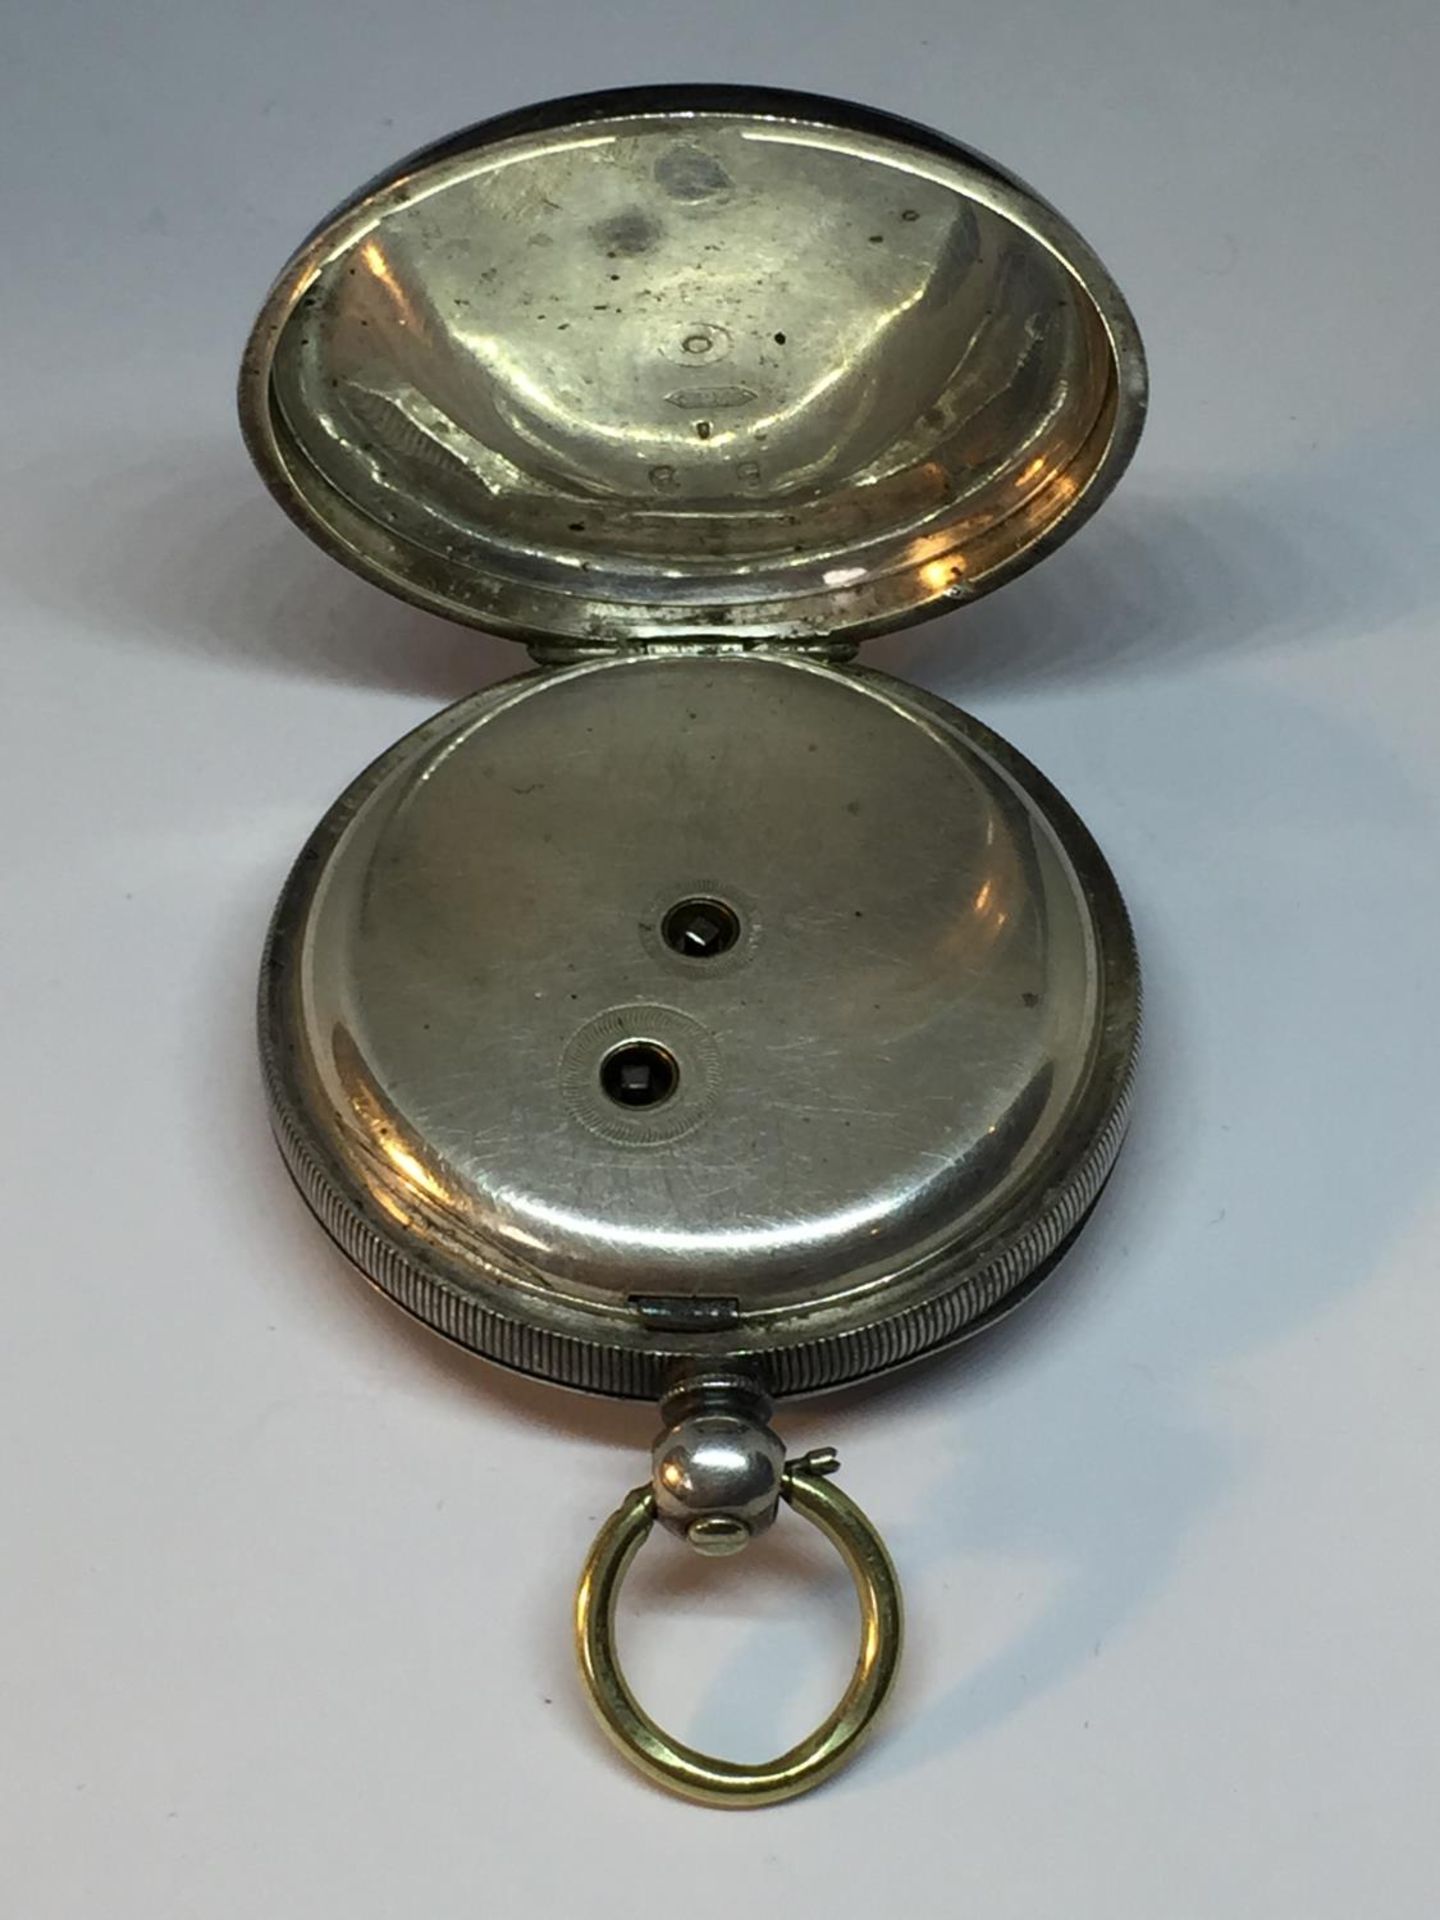 A MARKED 935 SILVER POCKET WATCH SEEN WORKING BUT NO WARRANTY GIVEN - Image 3 of 4